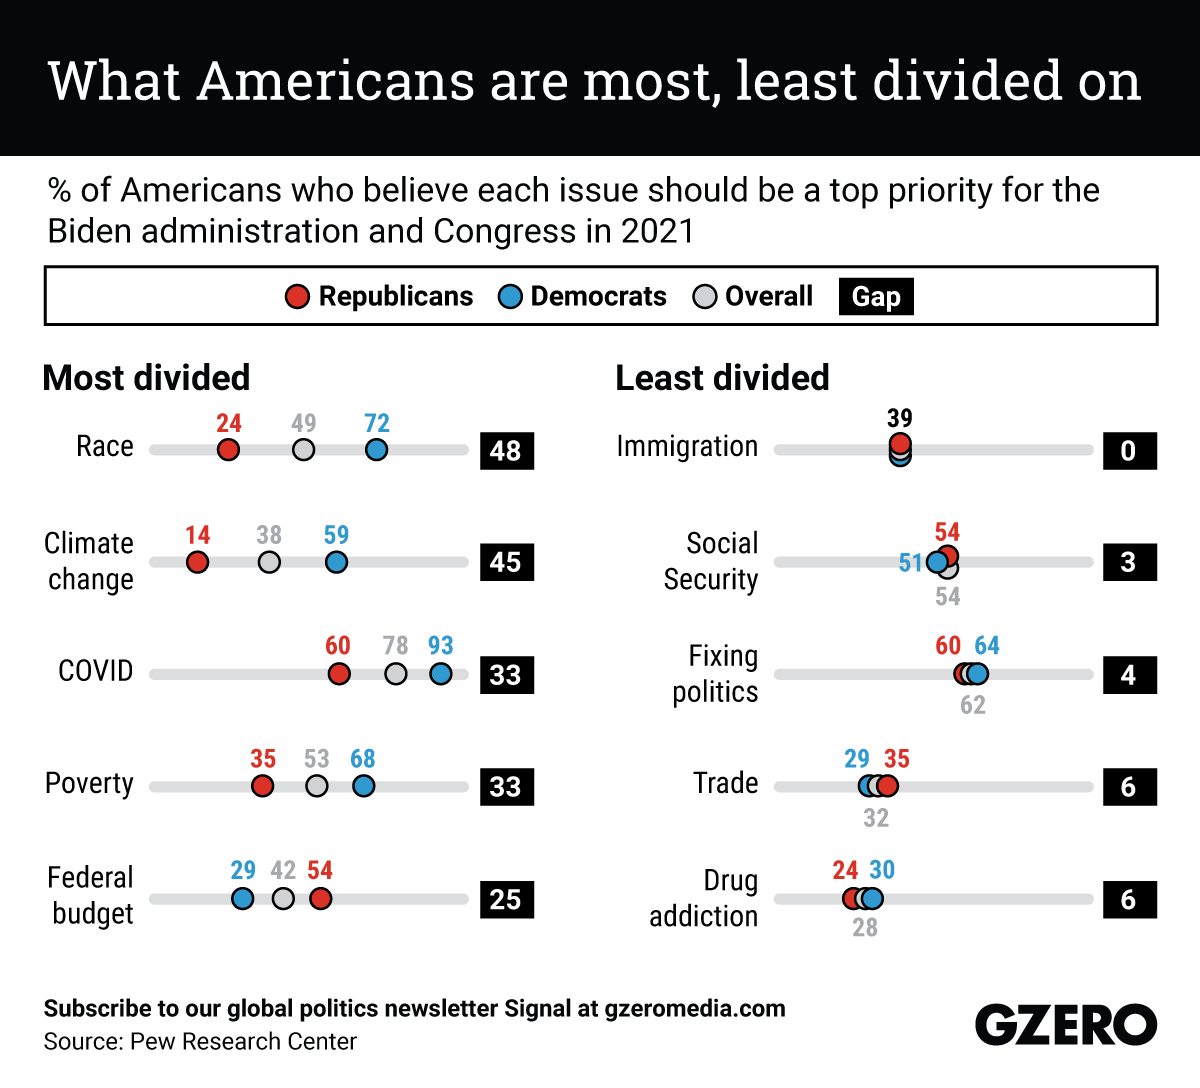 The Graphic Truth: What Americans are most, least divided on